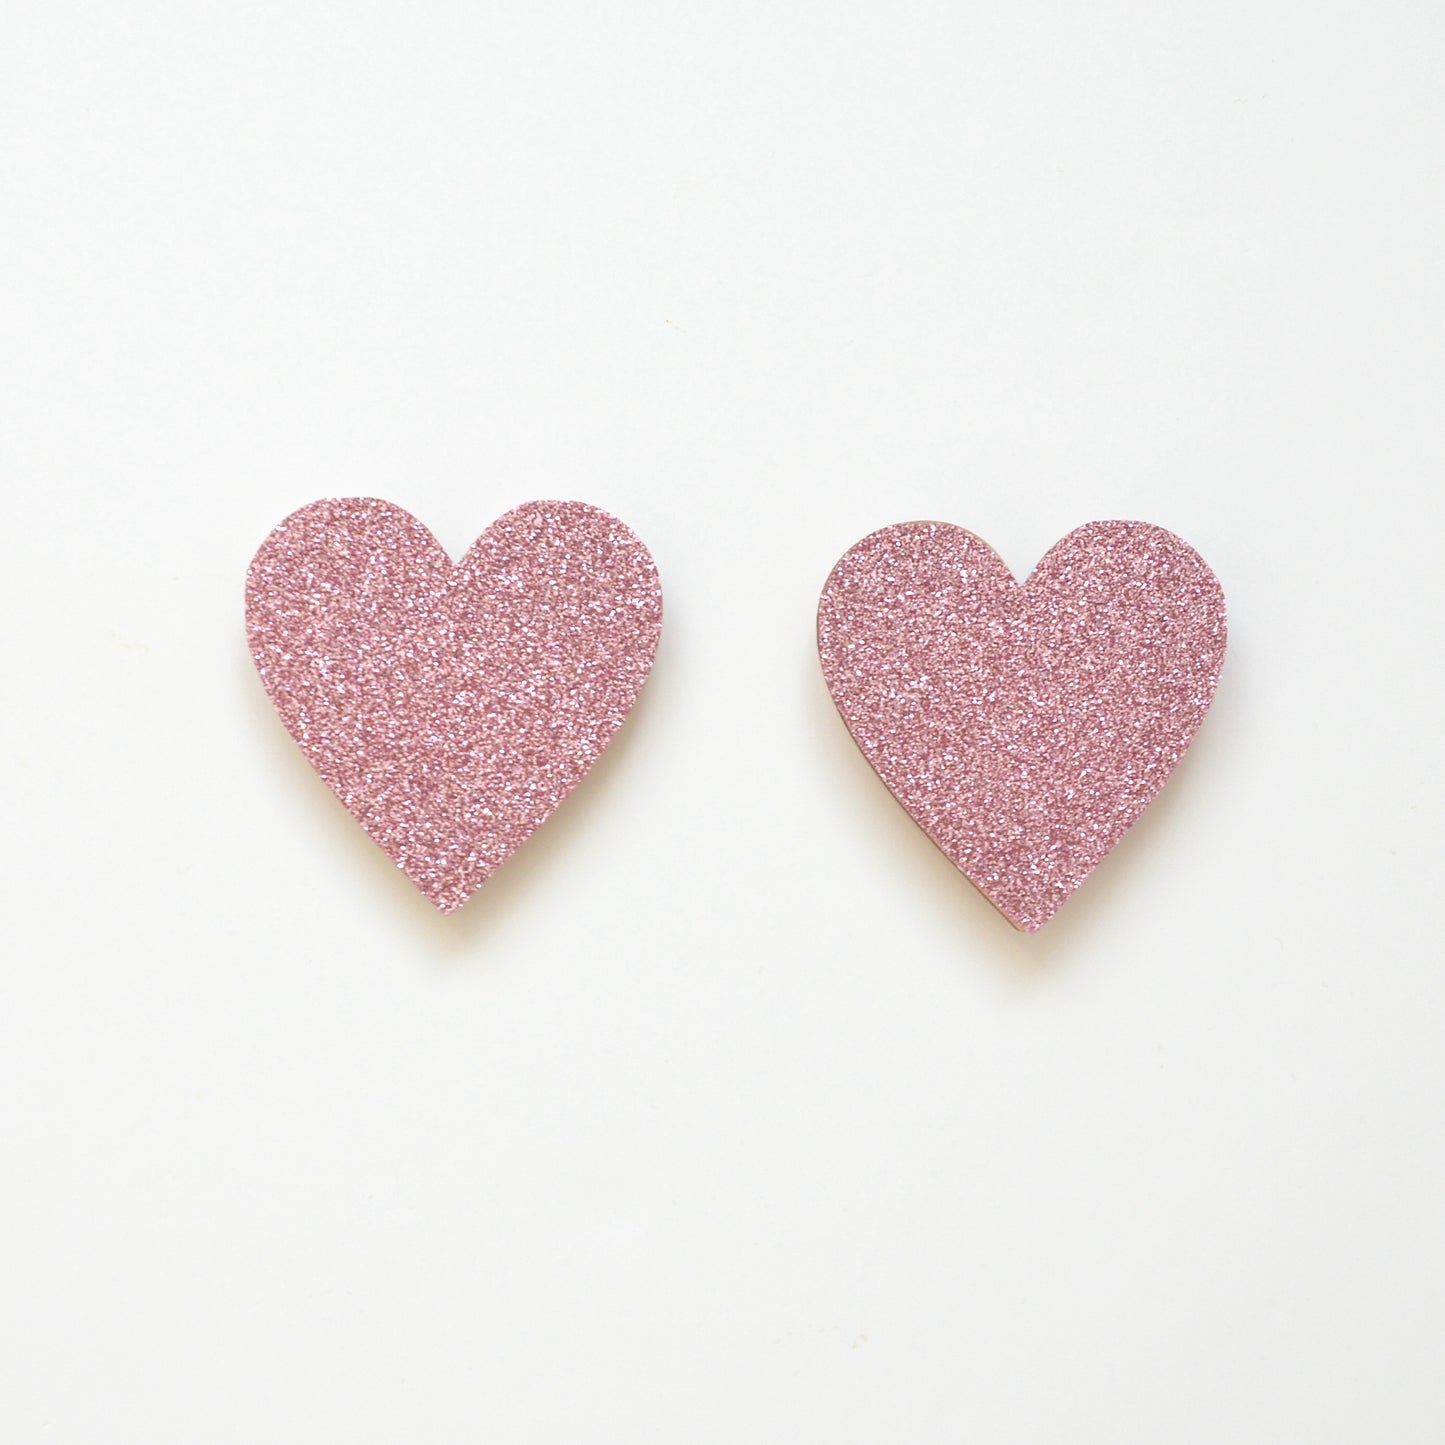 Pink Glitter Heart Decor for kids rooms. Adhesive wooden hooks.